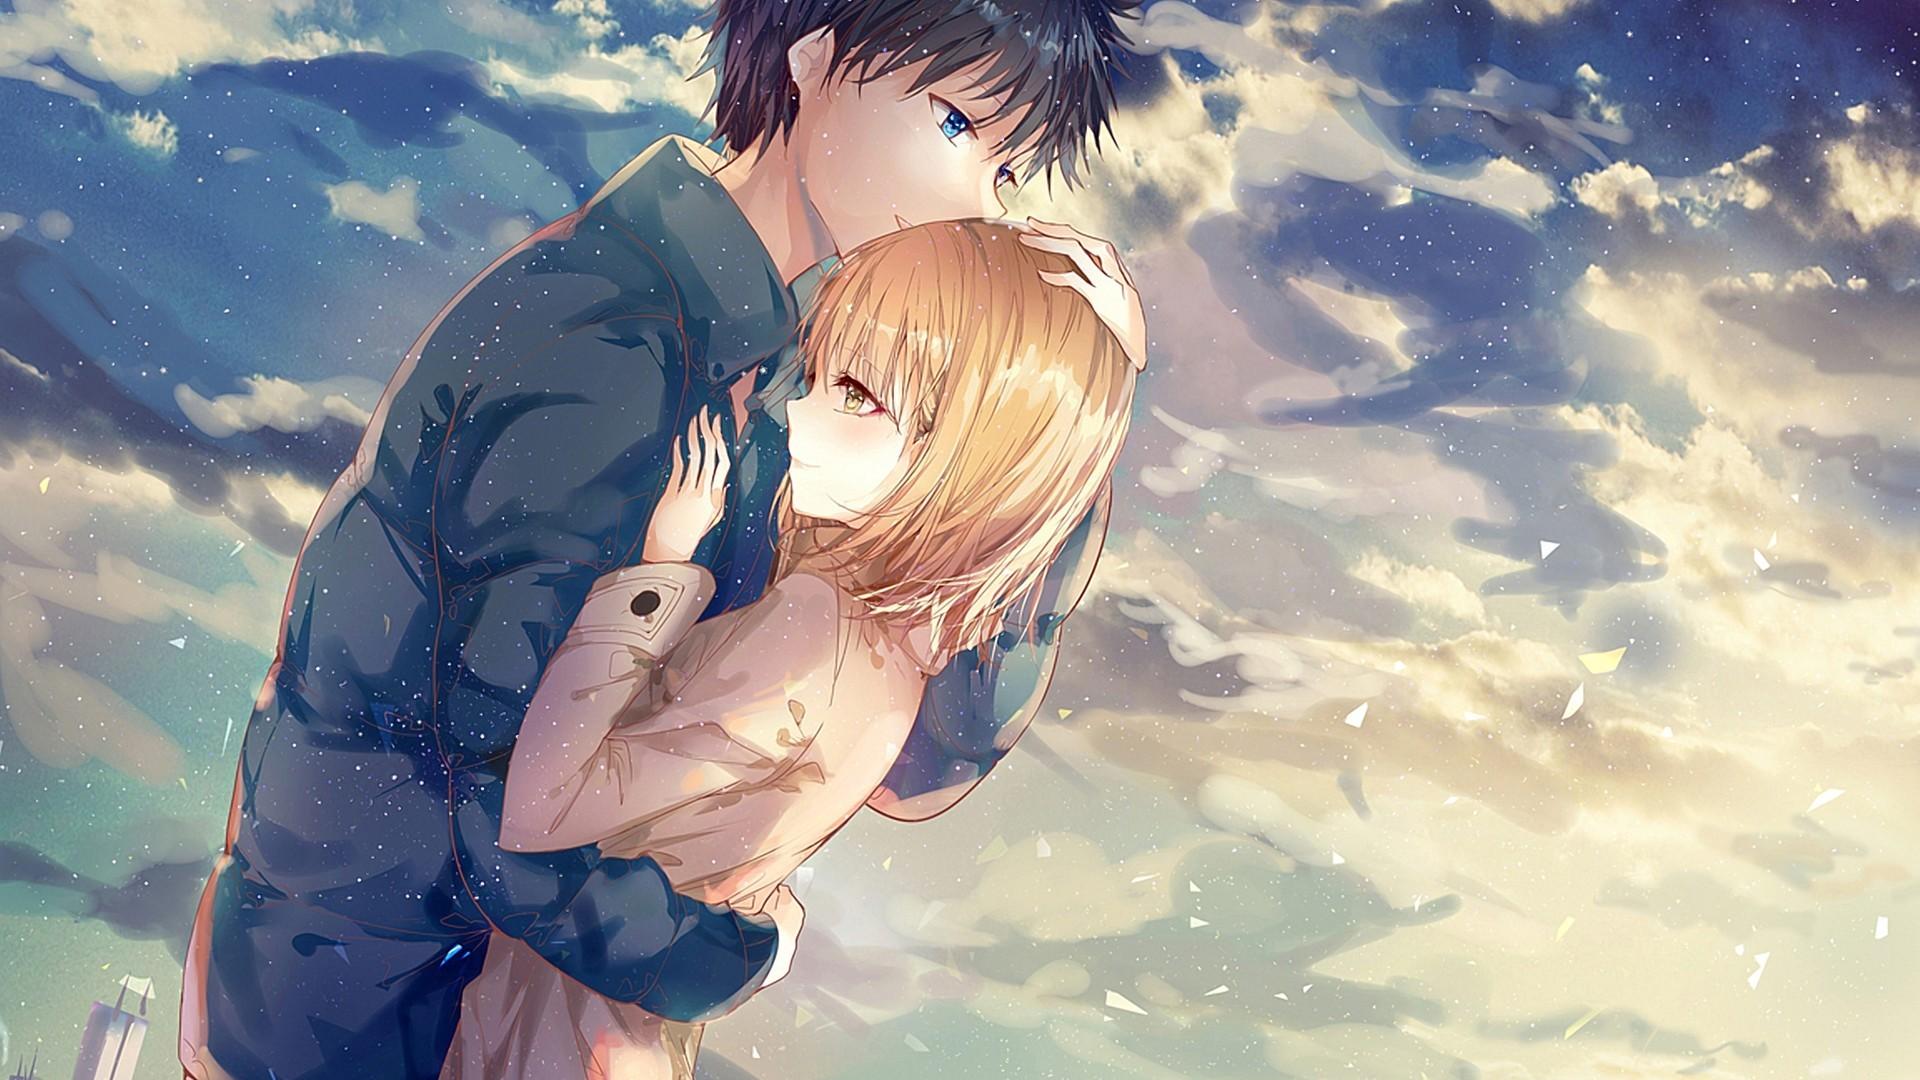 Download Anime Couple Wallpaper Hd Backgrounds Download Itl Cat